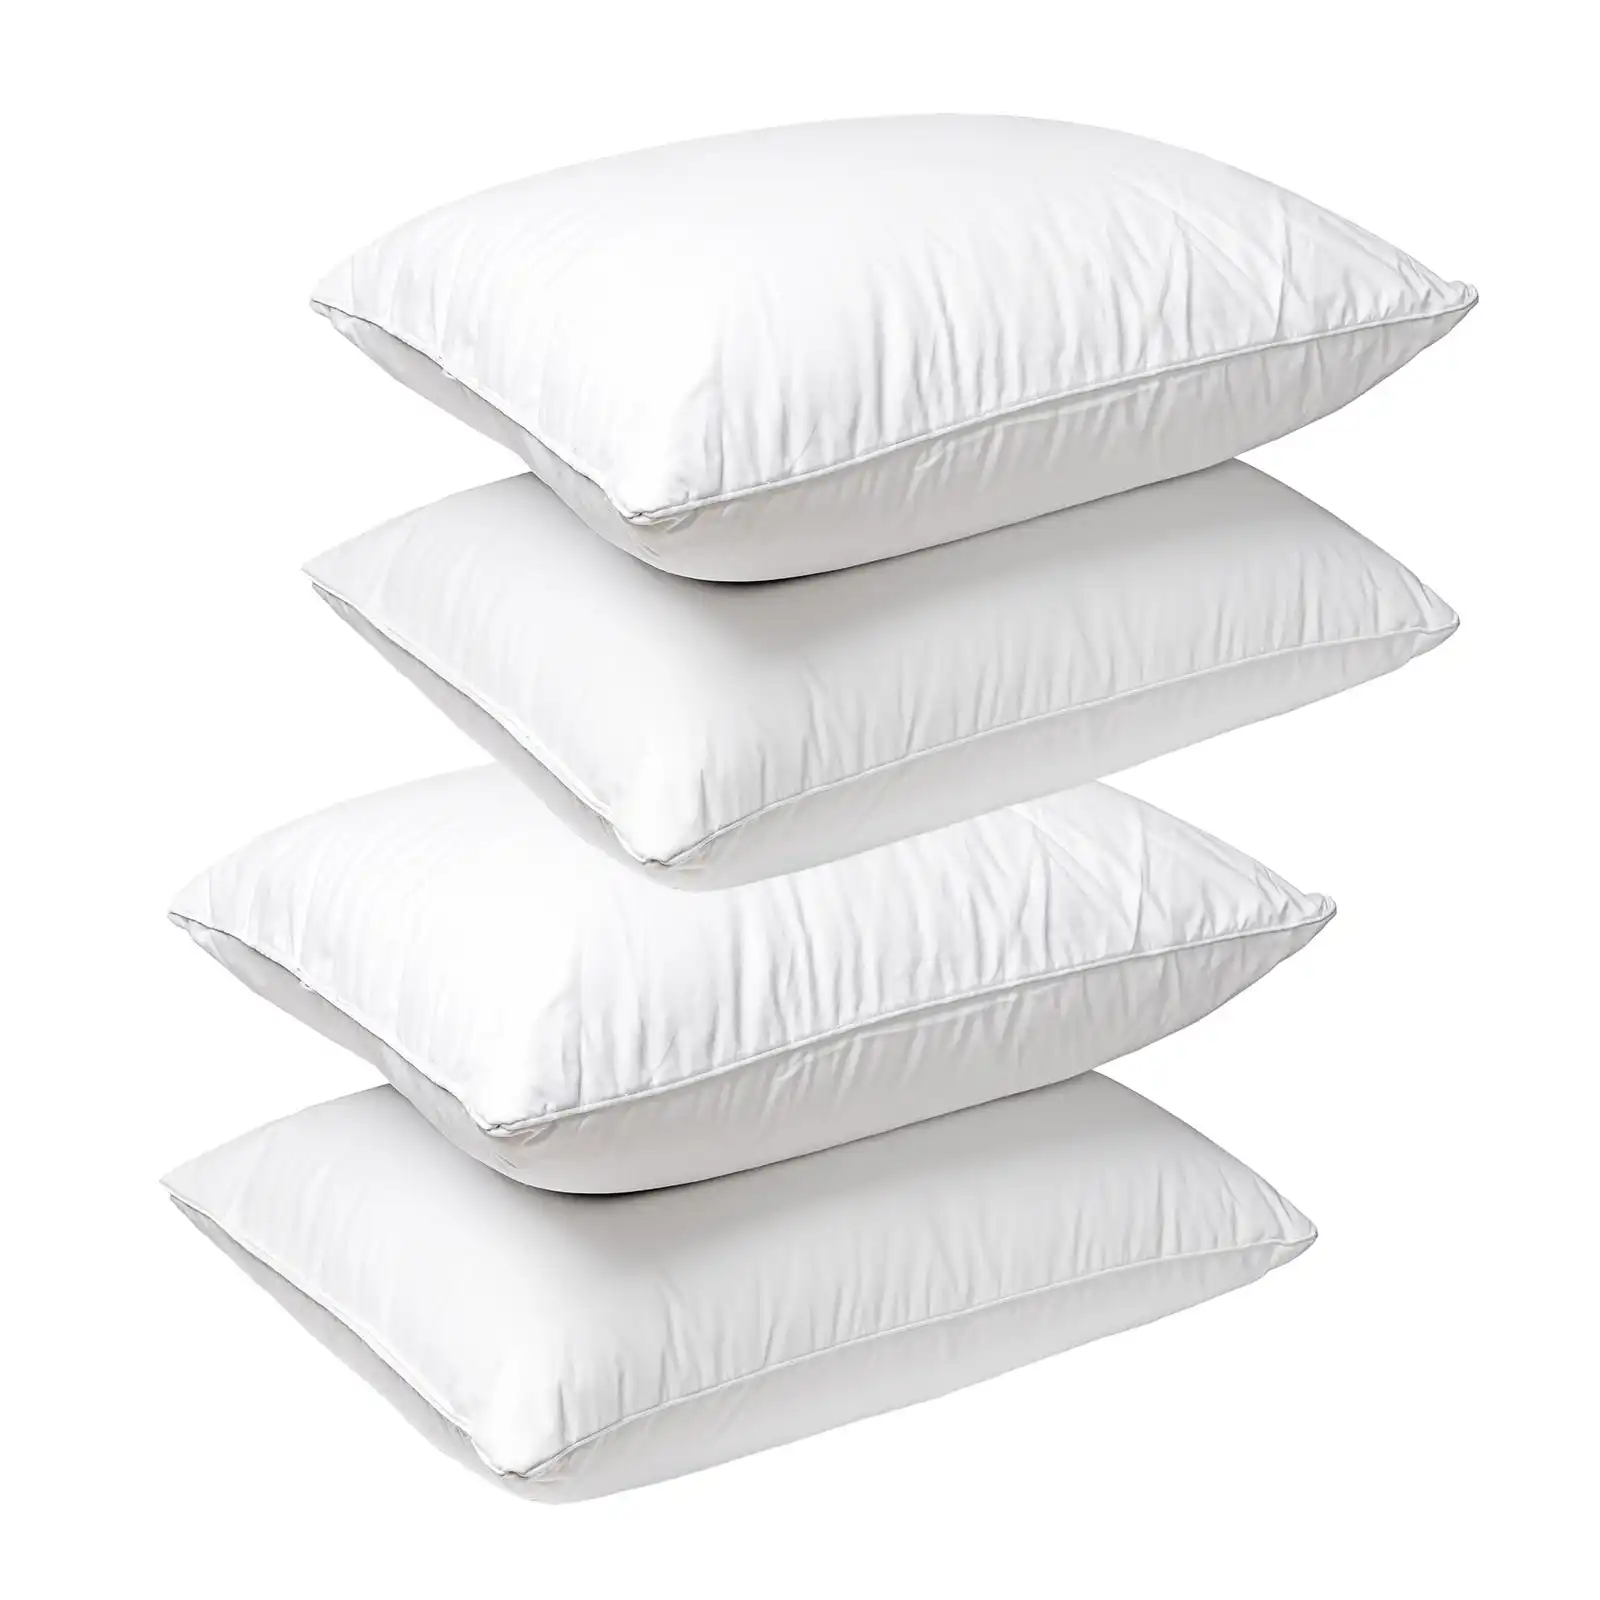 Royal Comfort Duck Feather Down Pillows 50 x 75cm 4 Pack Set Hotel Quality